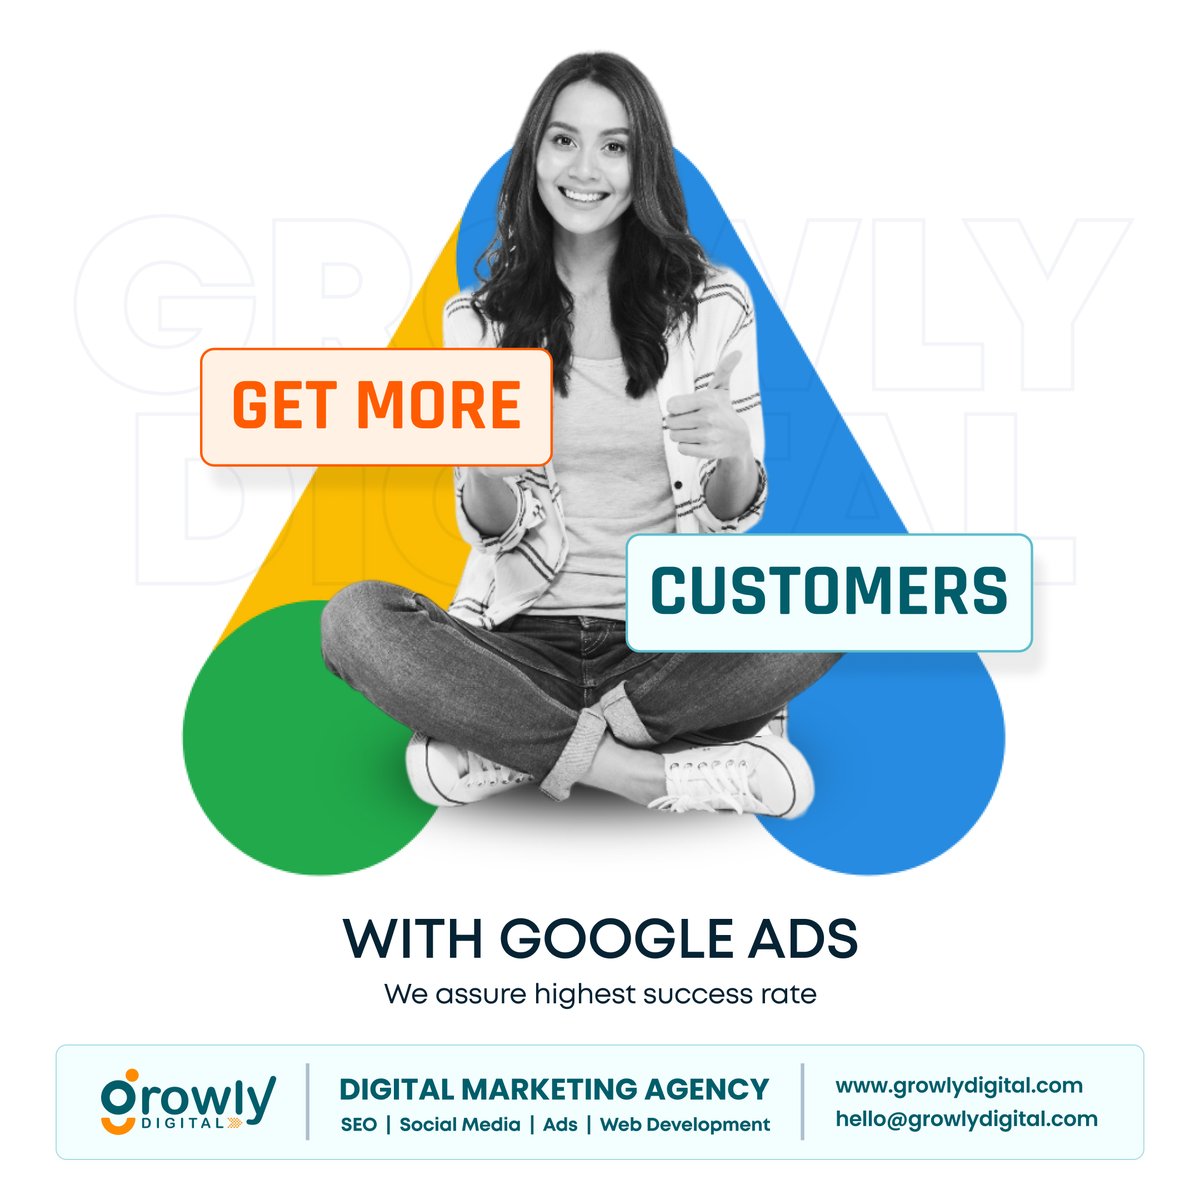 Struggling to reach new customers?
Google Ads can help!  We create targeted campaigns to get your business seen by the right people.

#growlydigital #surat #getmorecustomers #increaseleads #onlinemarketingstrategy #seomarketing #googleads #digitalmarketing #onlineadvertising